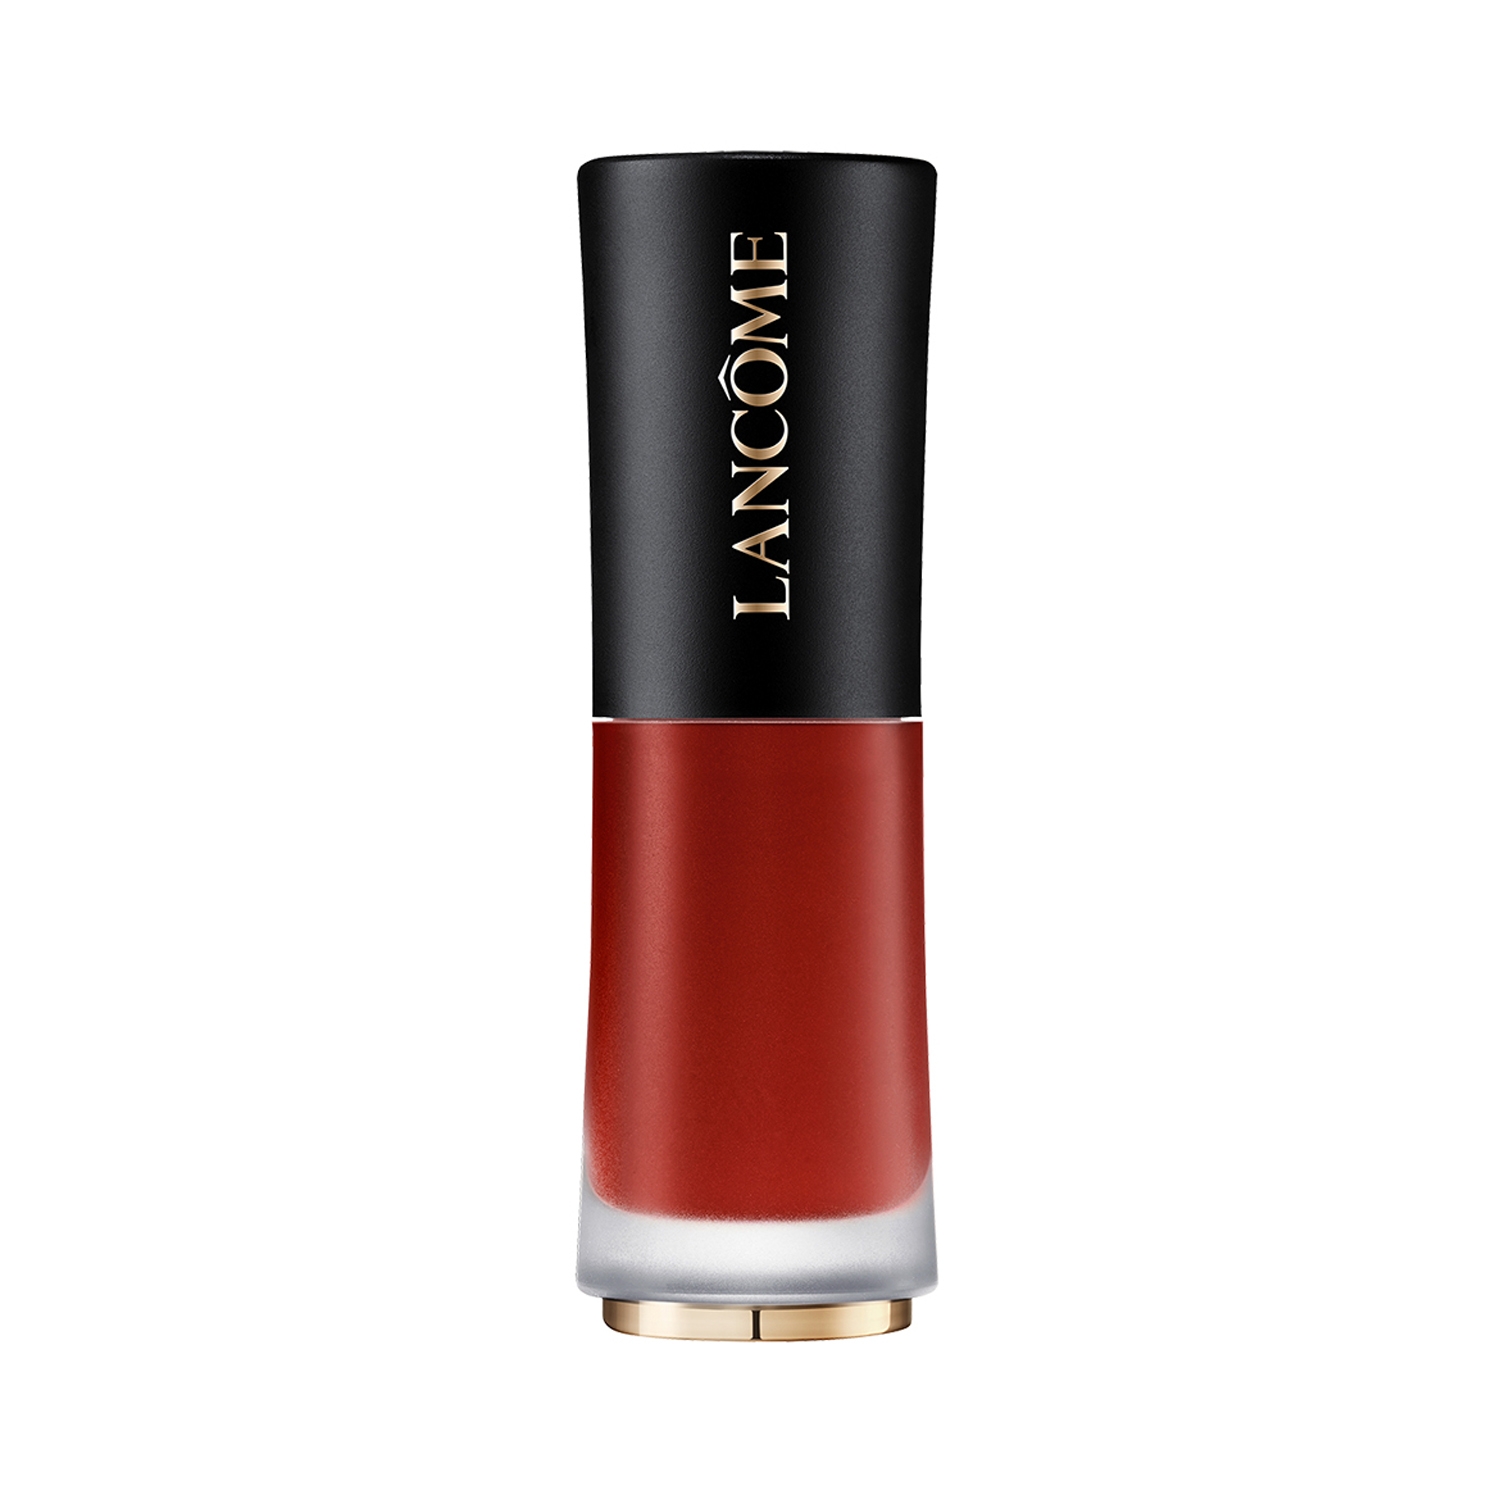 Lancome | Lancome L' Absolu Rouge Drama Ink Liquid Lipstick - 196 French Touch (6ml)